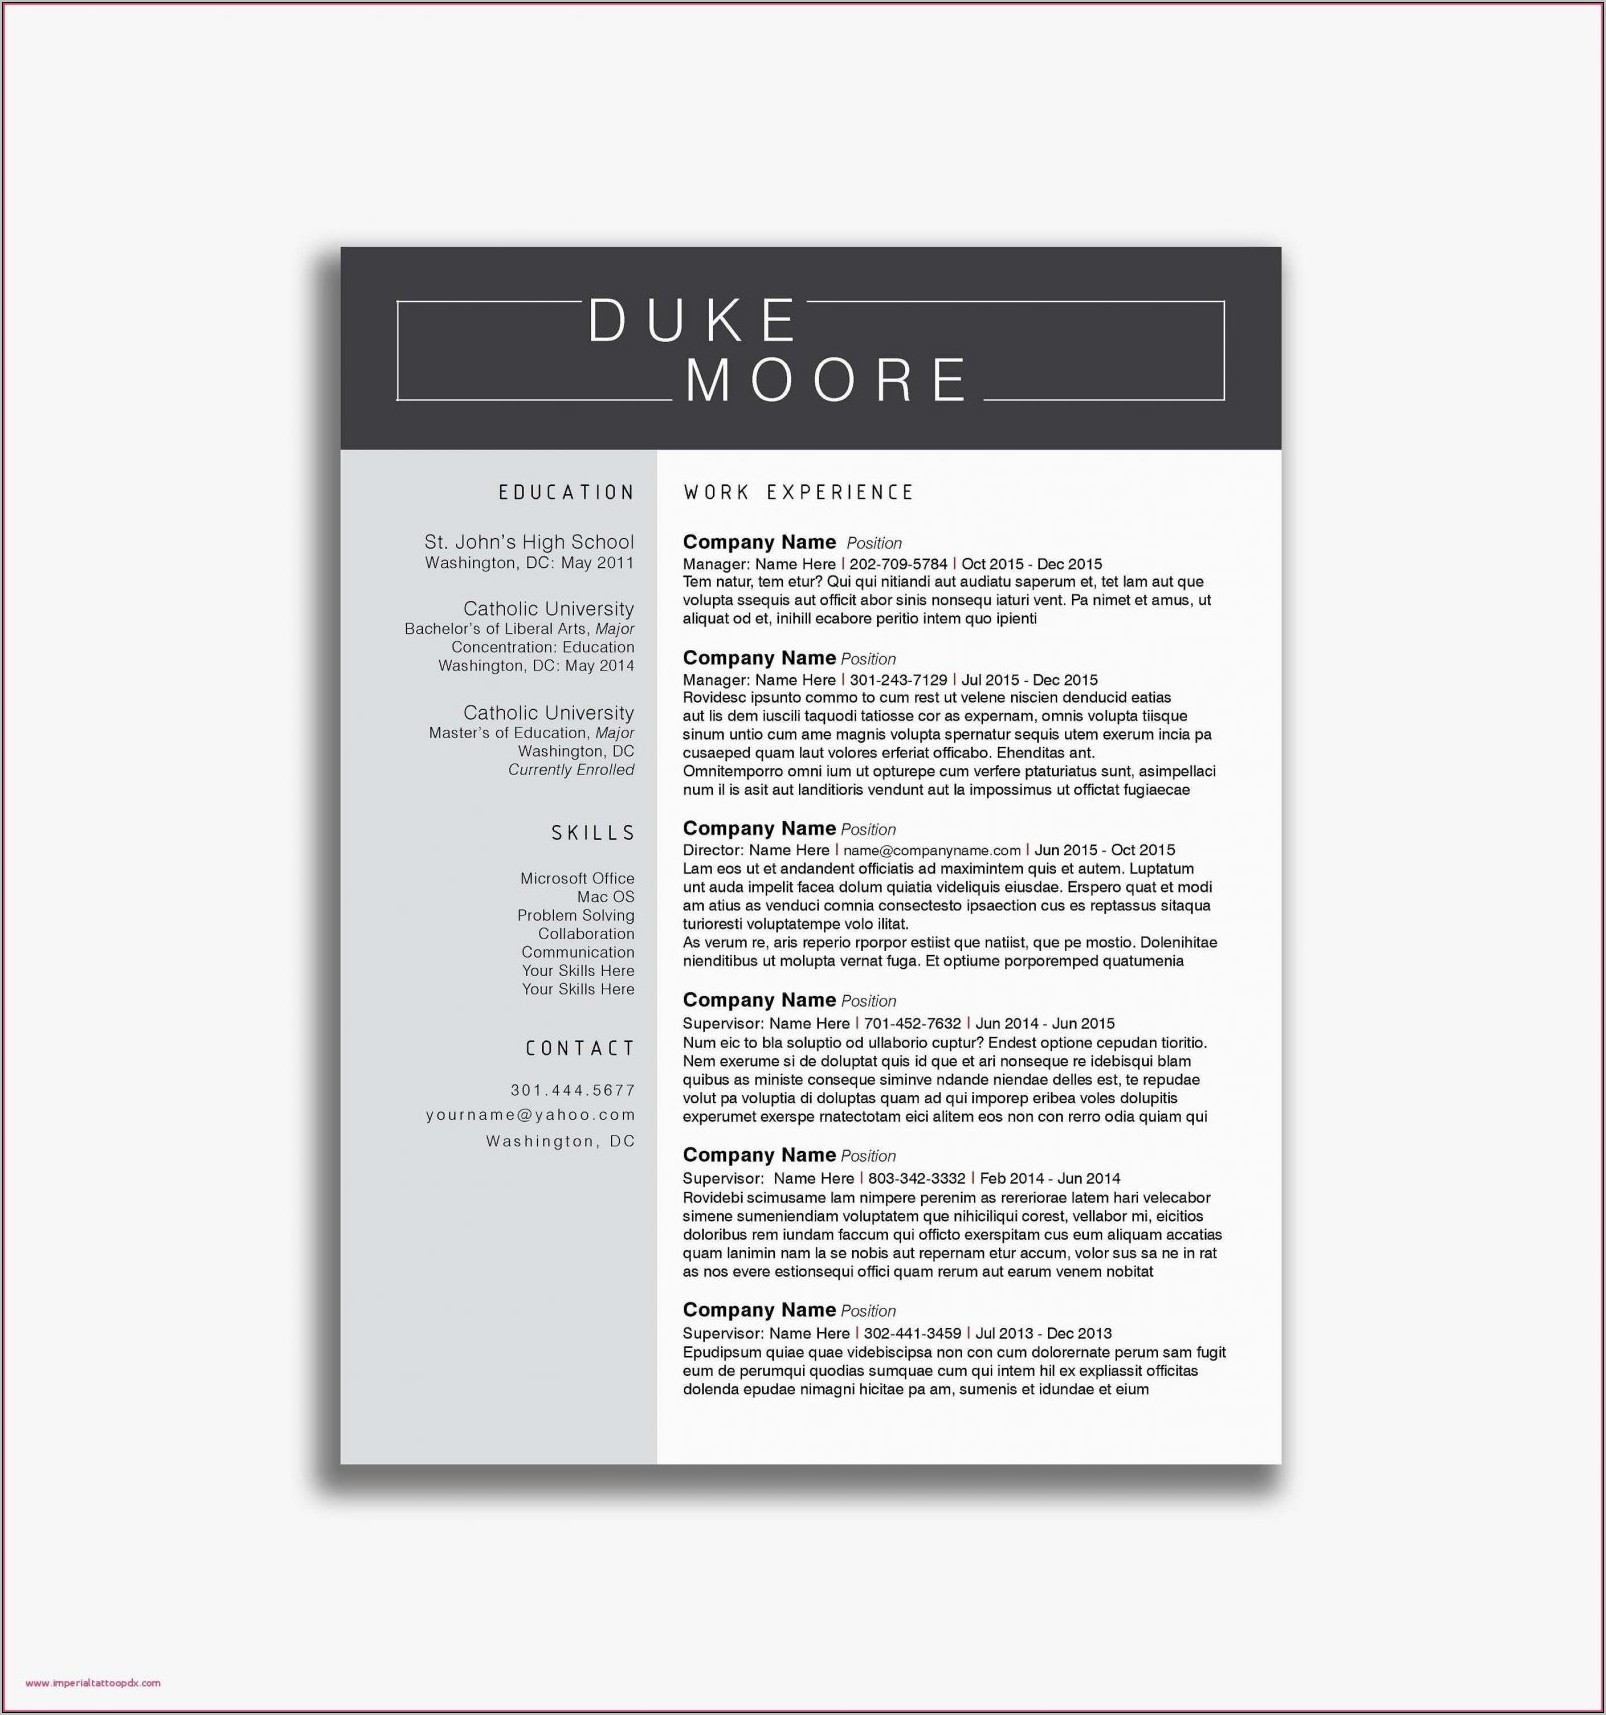 Resume Samples For Freshers Pdf Free Download